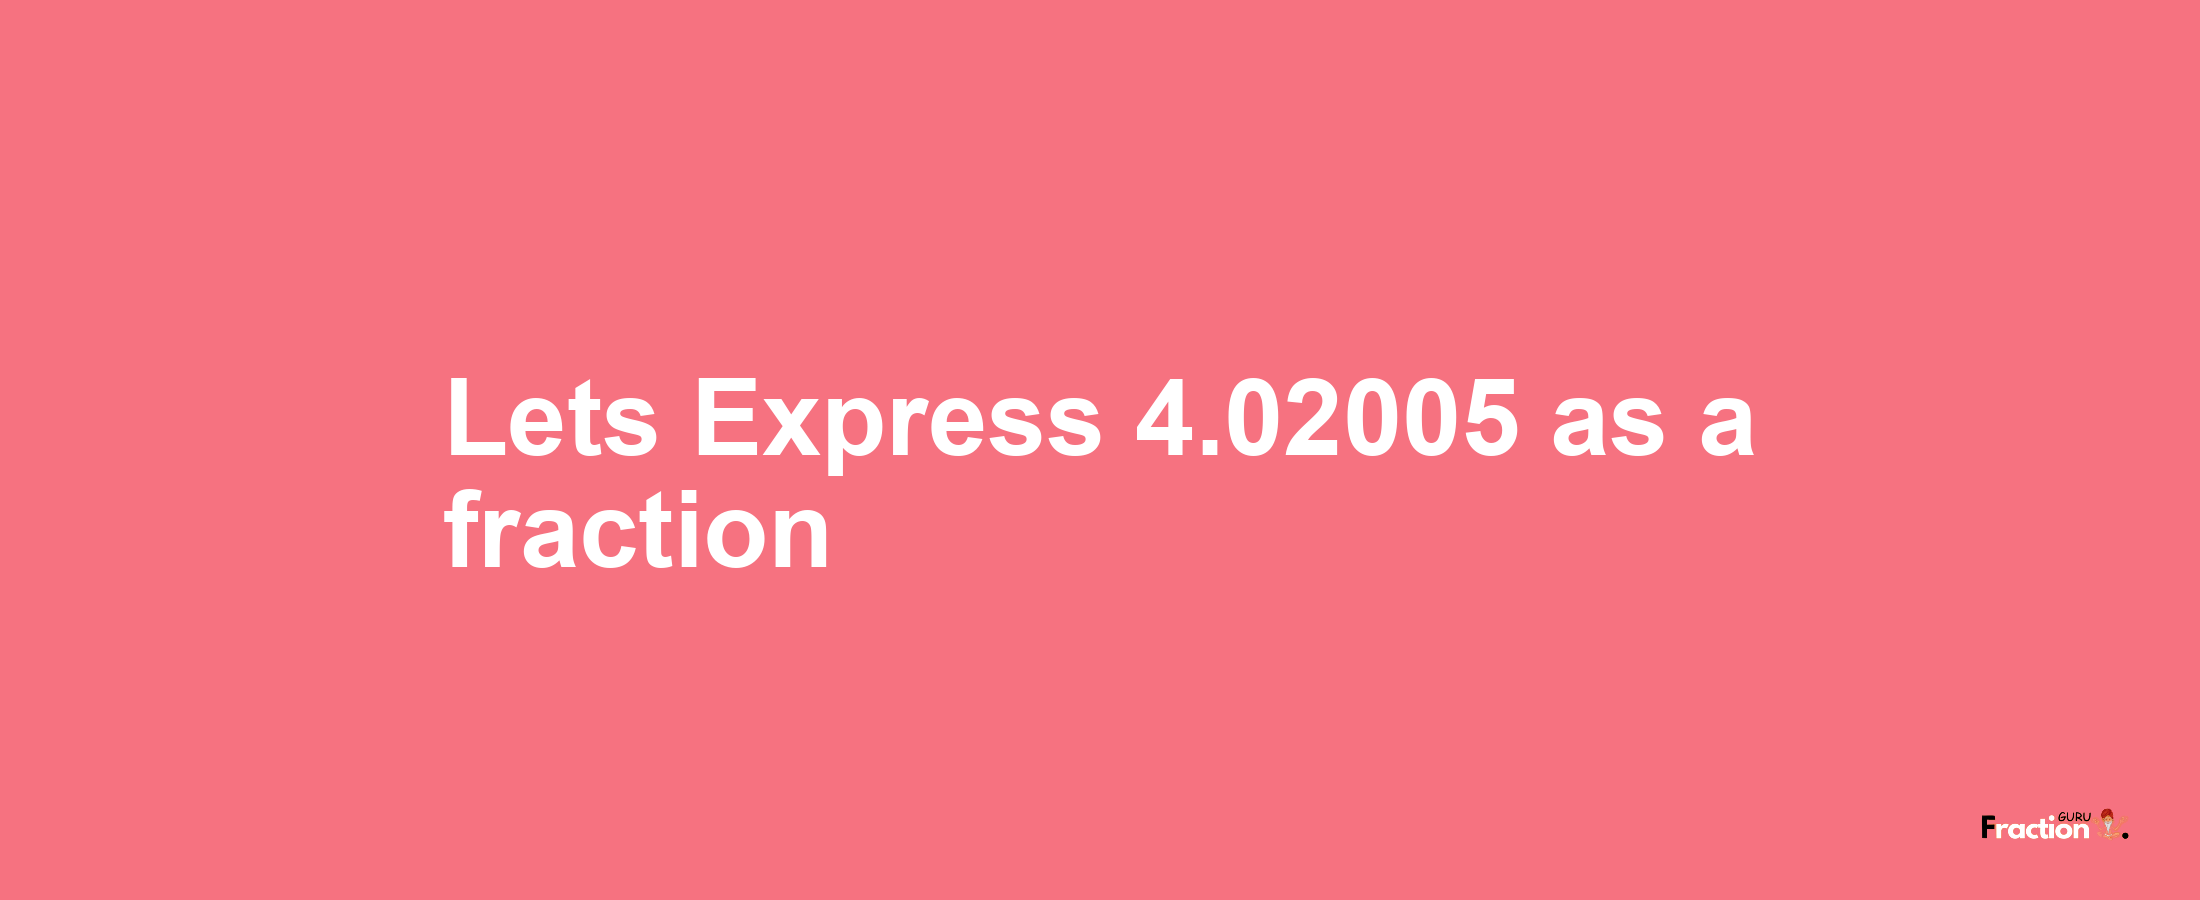 Lets Express 4.02005 as afraction